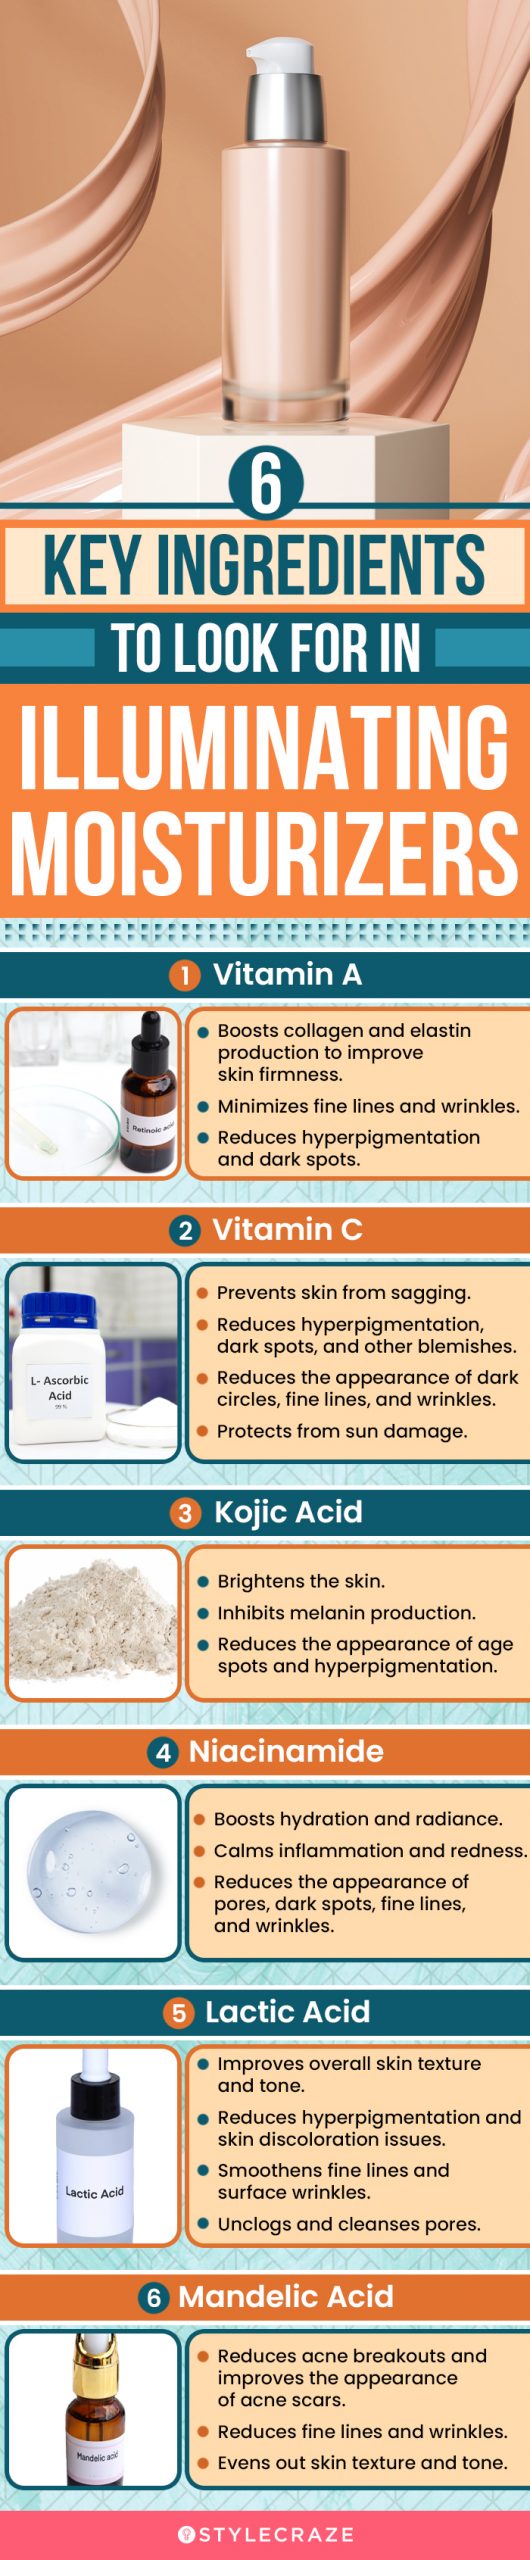 6 Key Ingredients To Look For In Illuminating Moisturizers (infographic)